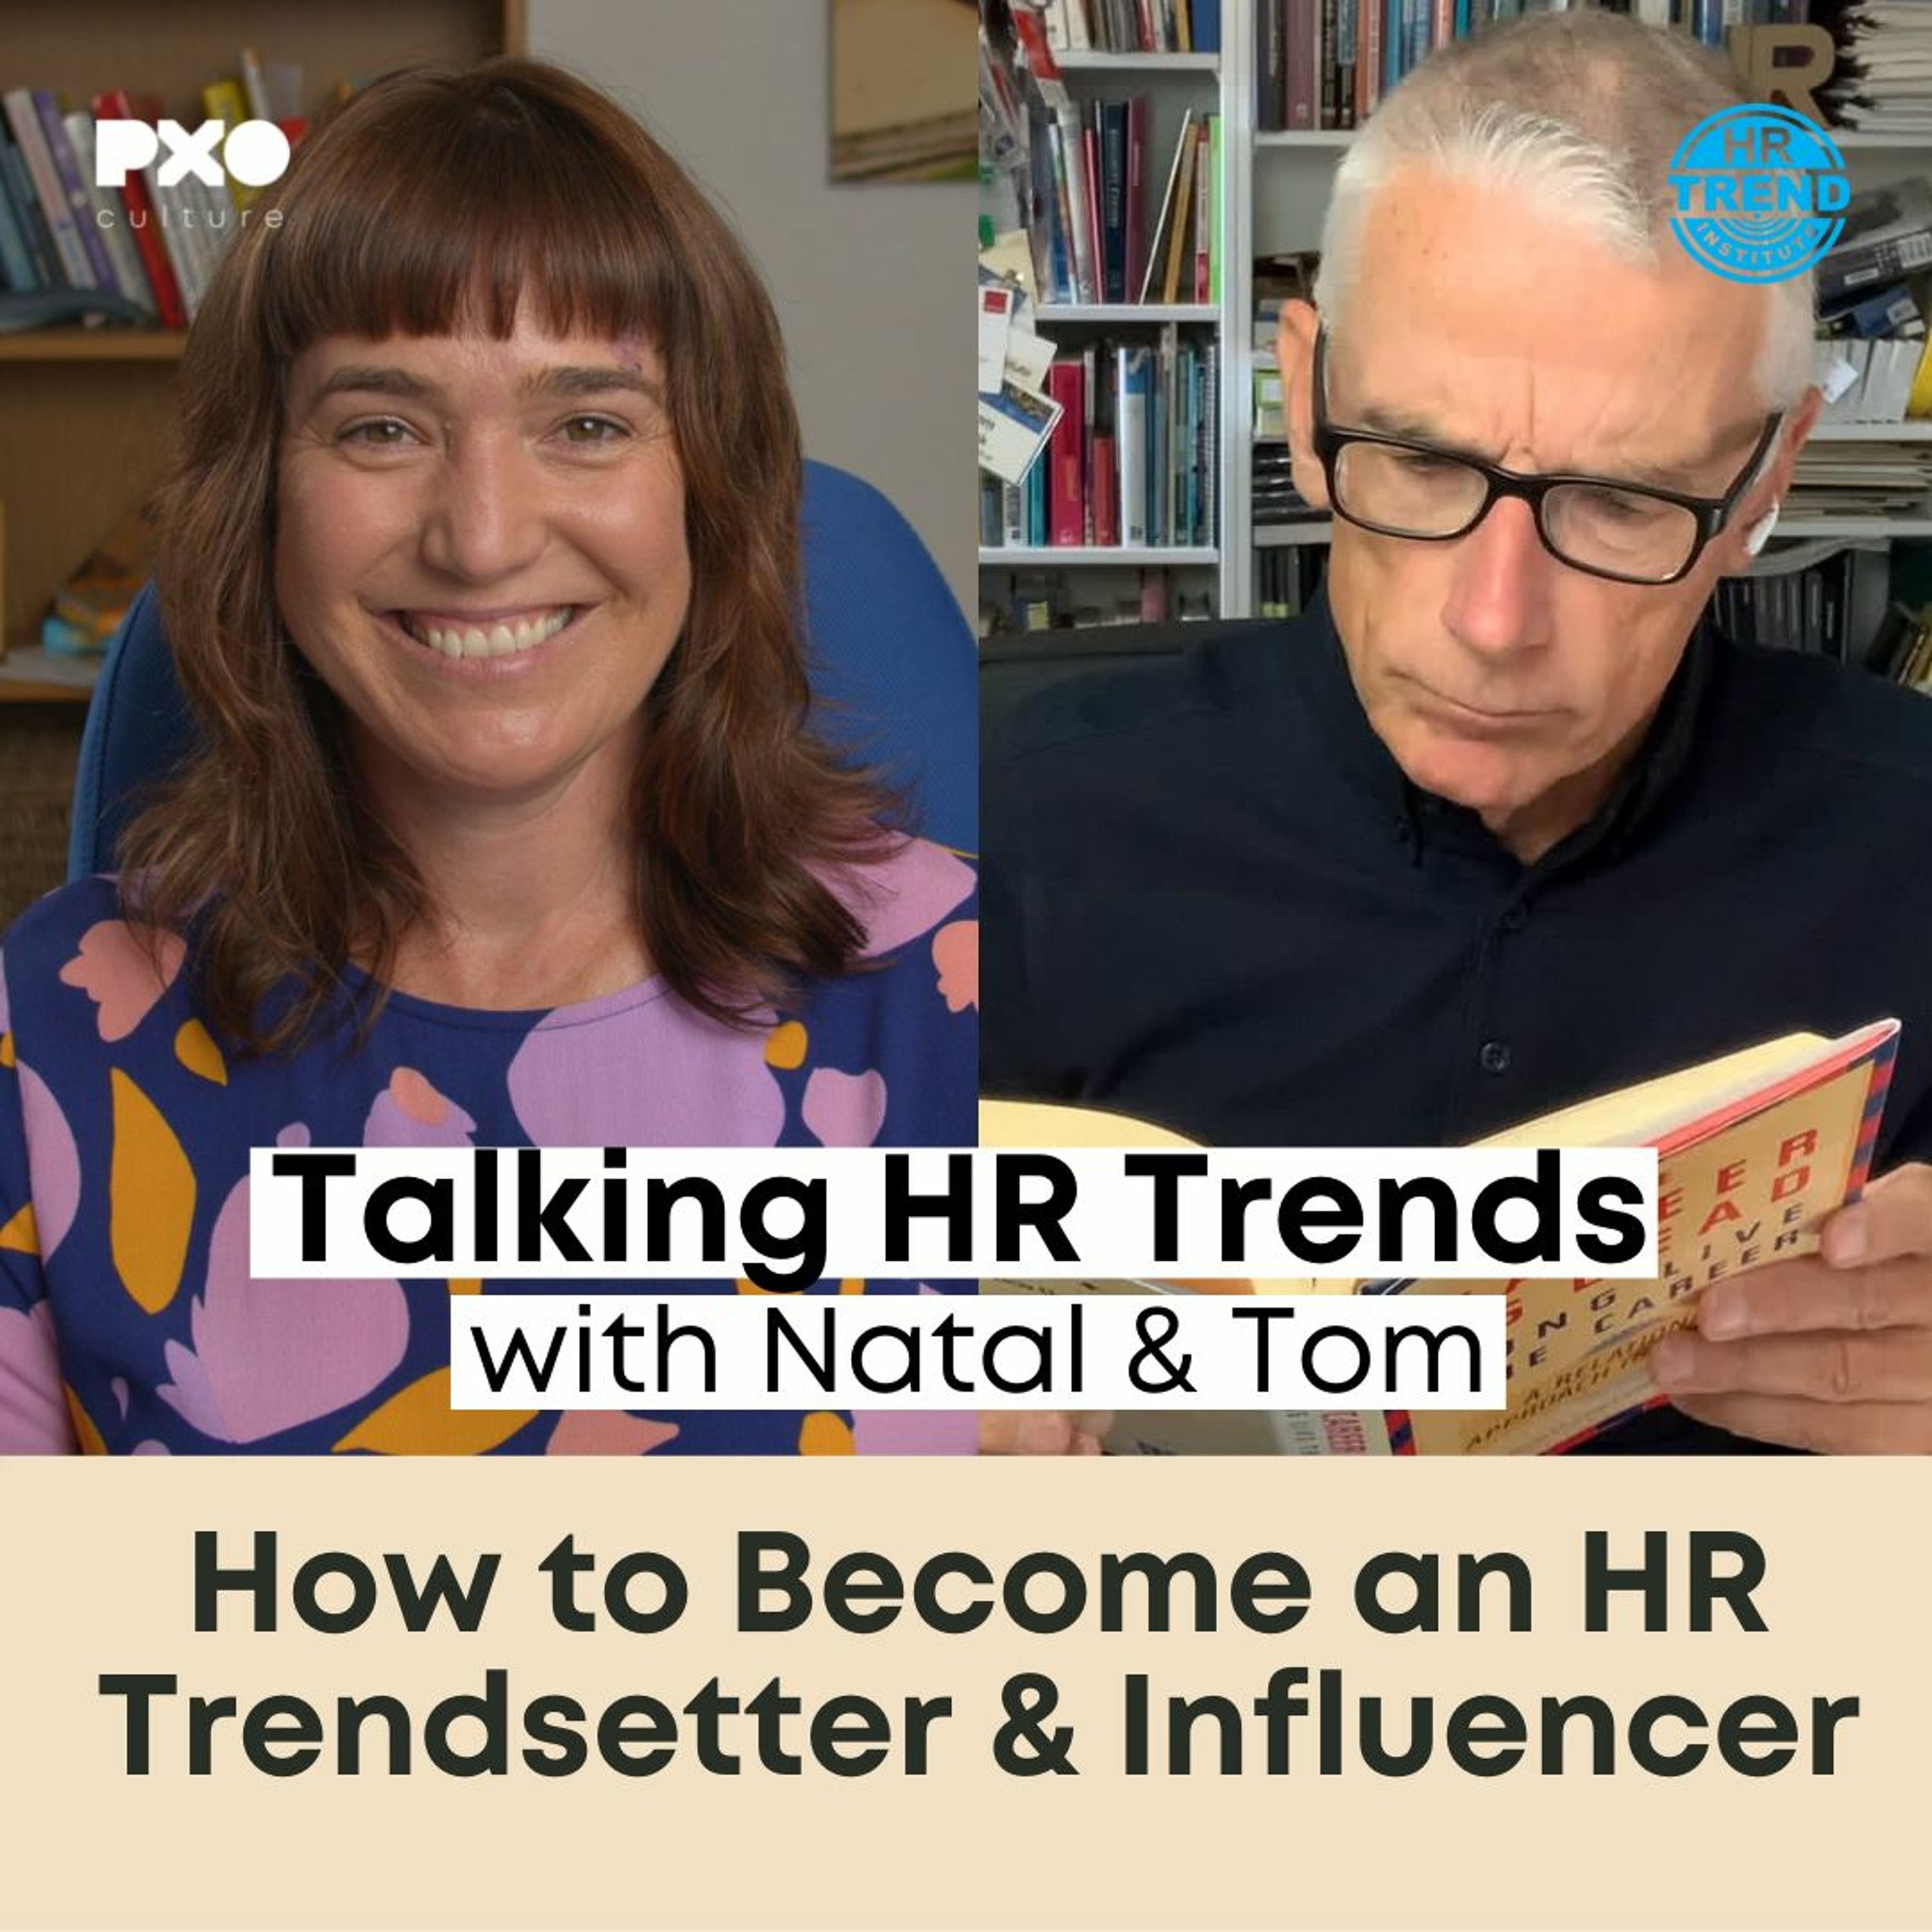 How to become an HR trendsetter and influencer